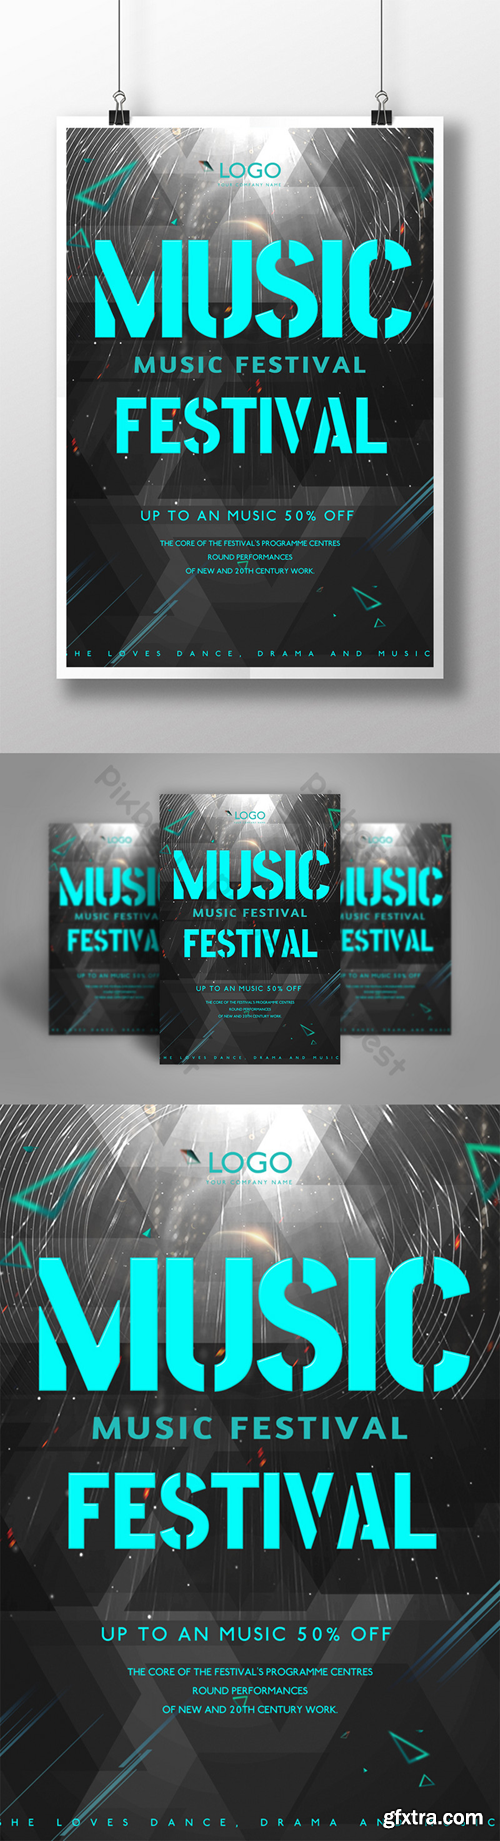 Music festival rock geometric abstract text poster Template PSD